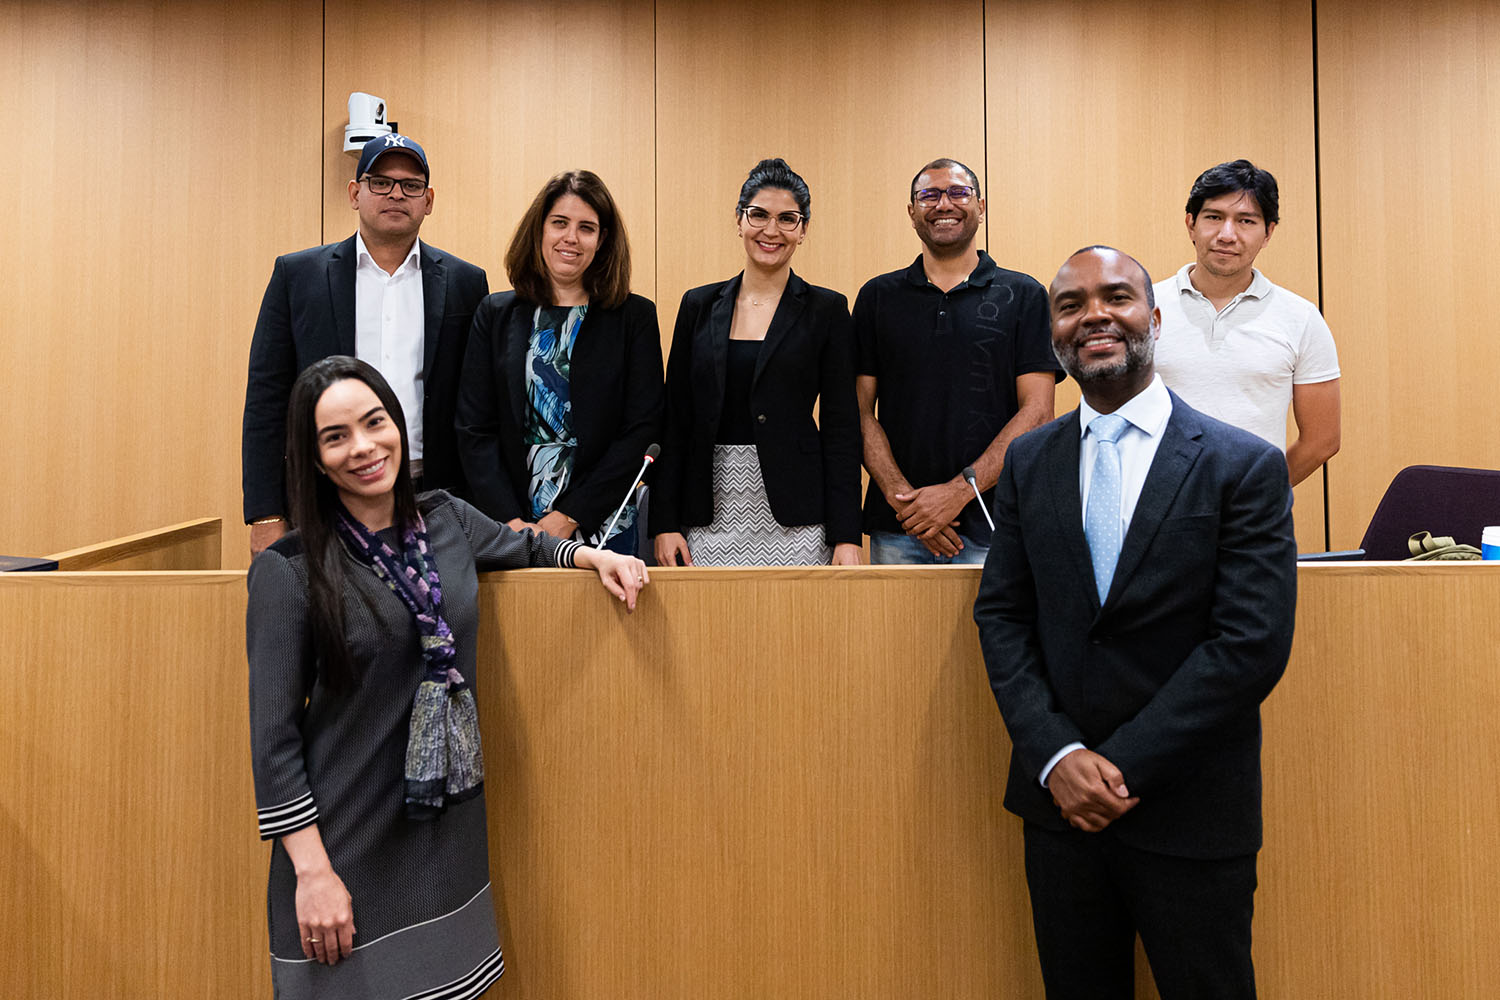 seven students from the English Language Institute's English for Lawyers cohort pose together in a court room setting